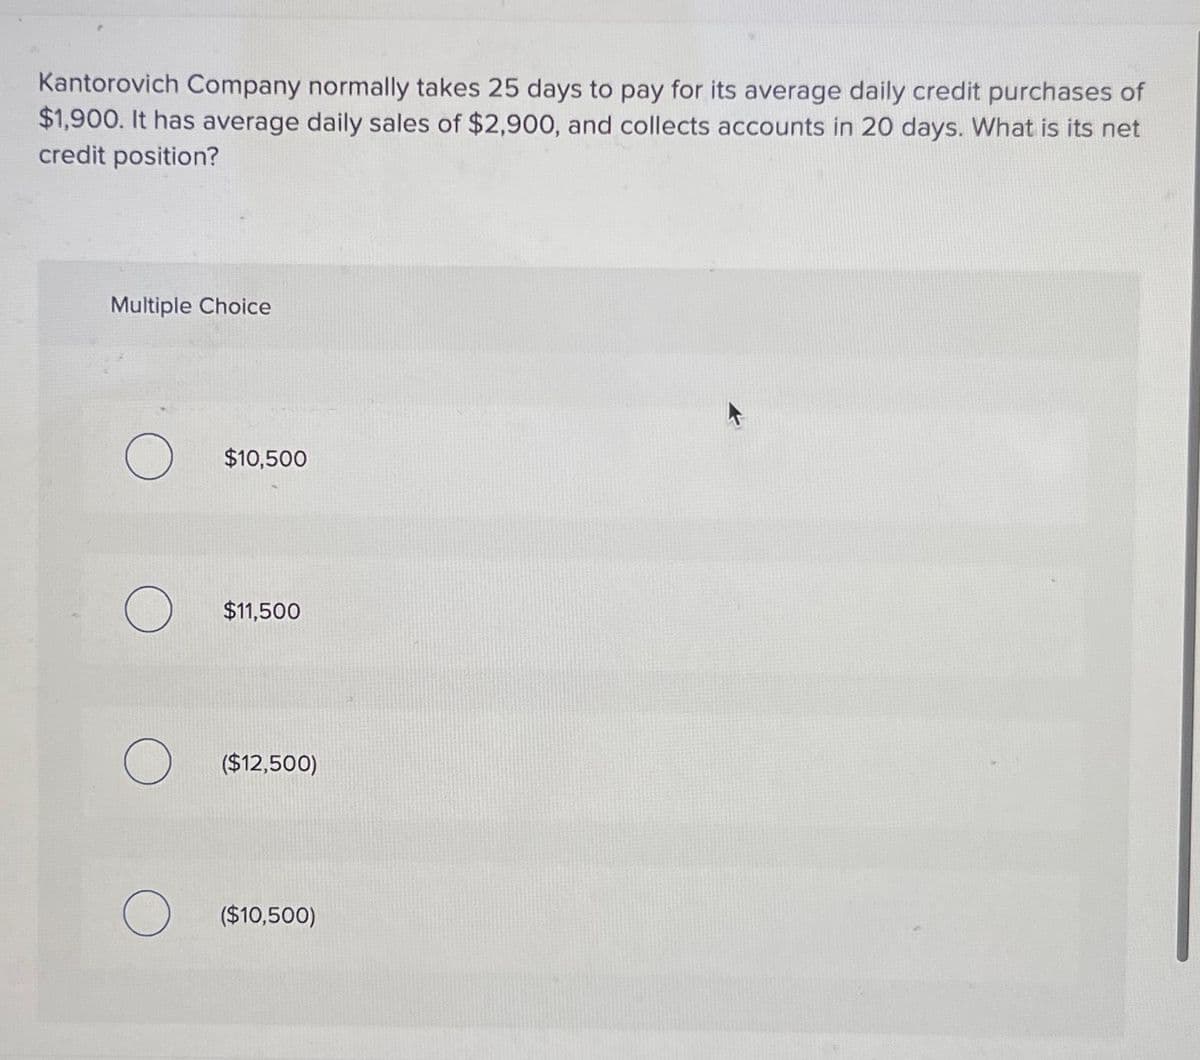 Kantorovich Company normally takes 25 days to pay for its average daily credit purchases of
$1,900. It has average daily sales of $2,900, and collects accounts in 20 days. What is its net
credit position?
Multiple Choice
O $10,500
O
$11,500
($12,500)
O ($10,500)